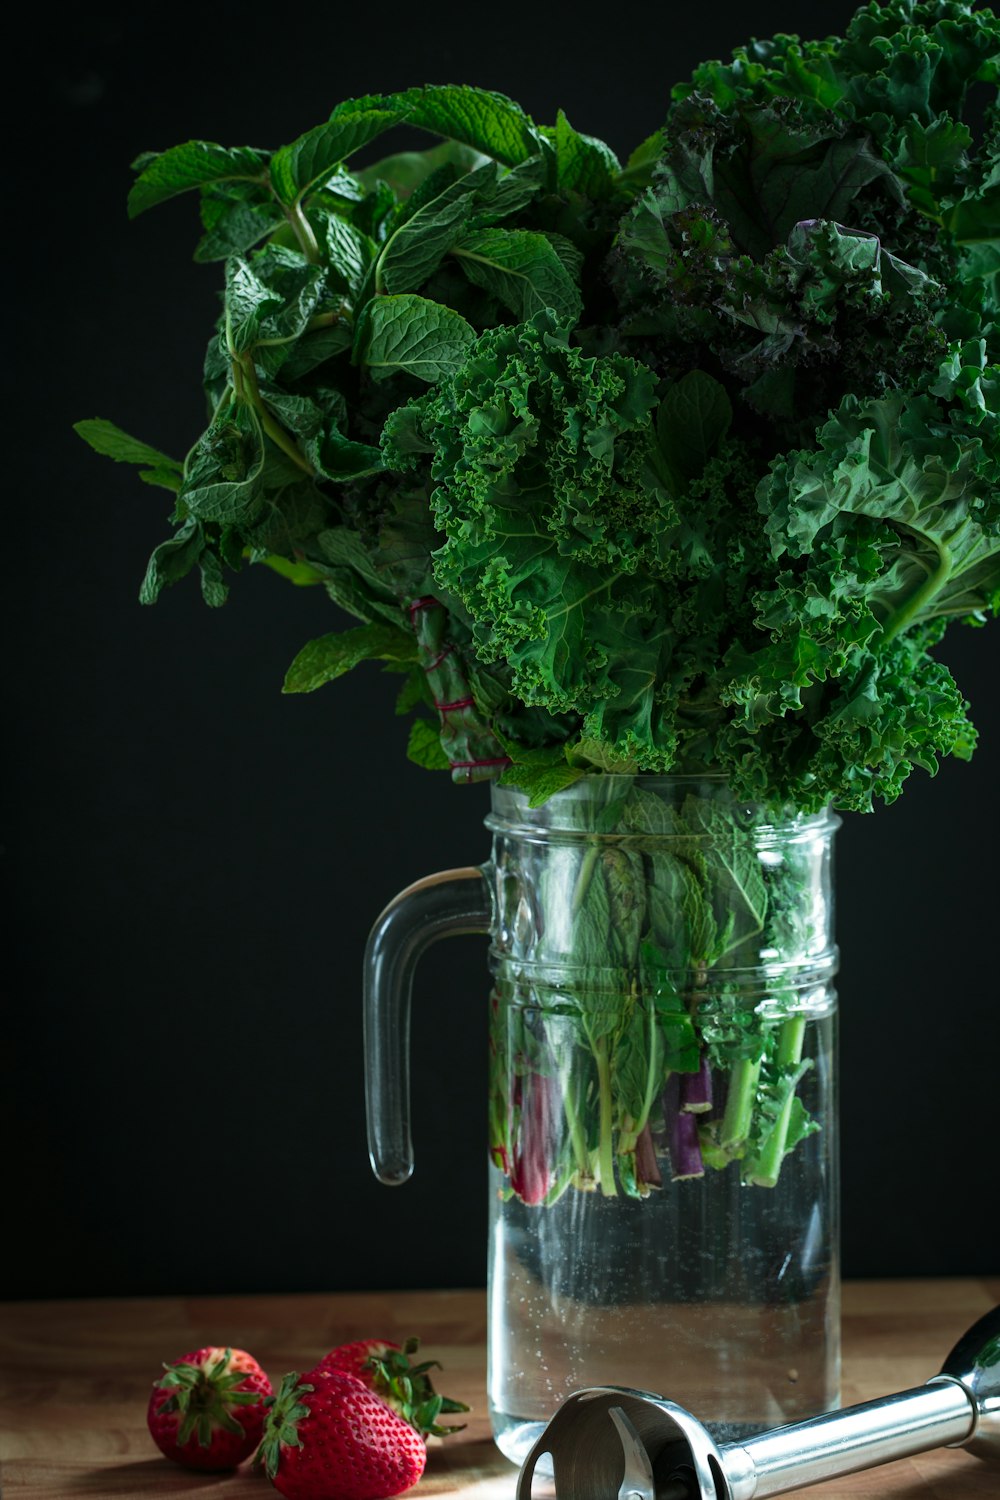 green vegetables on clear glass pitcher